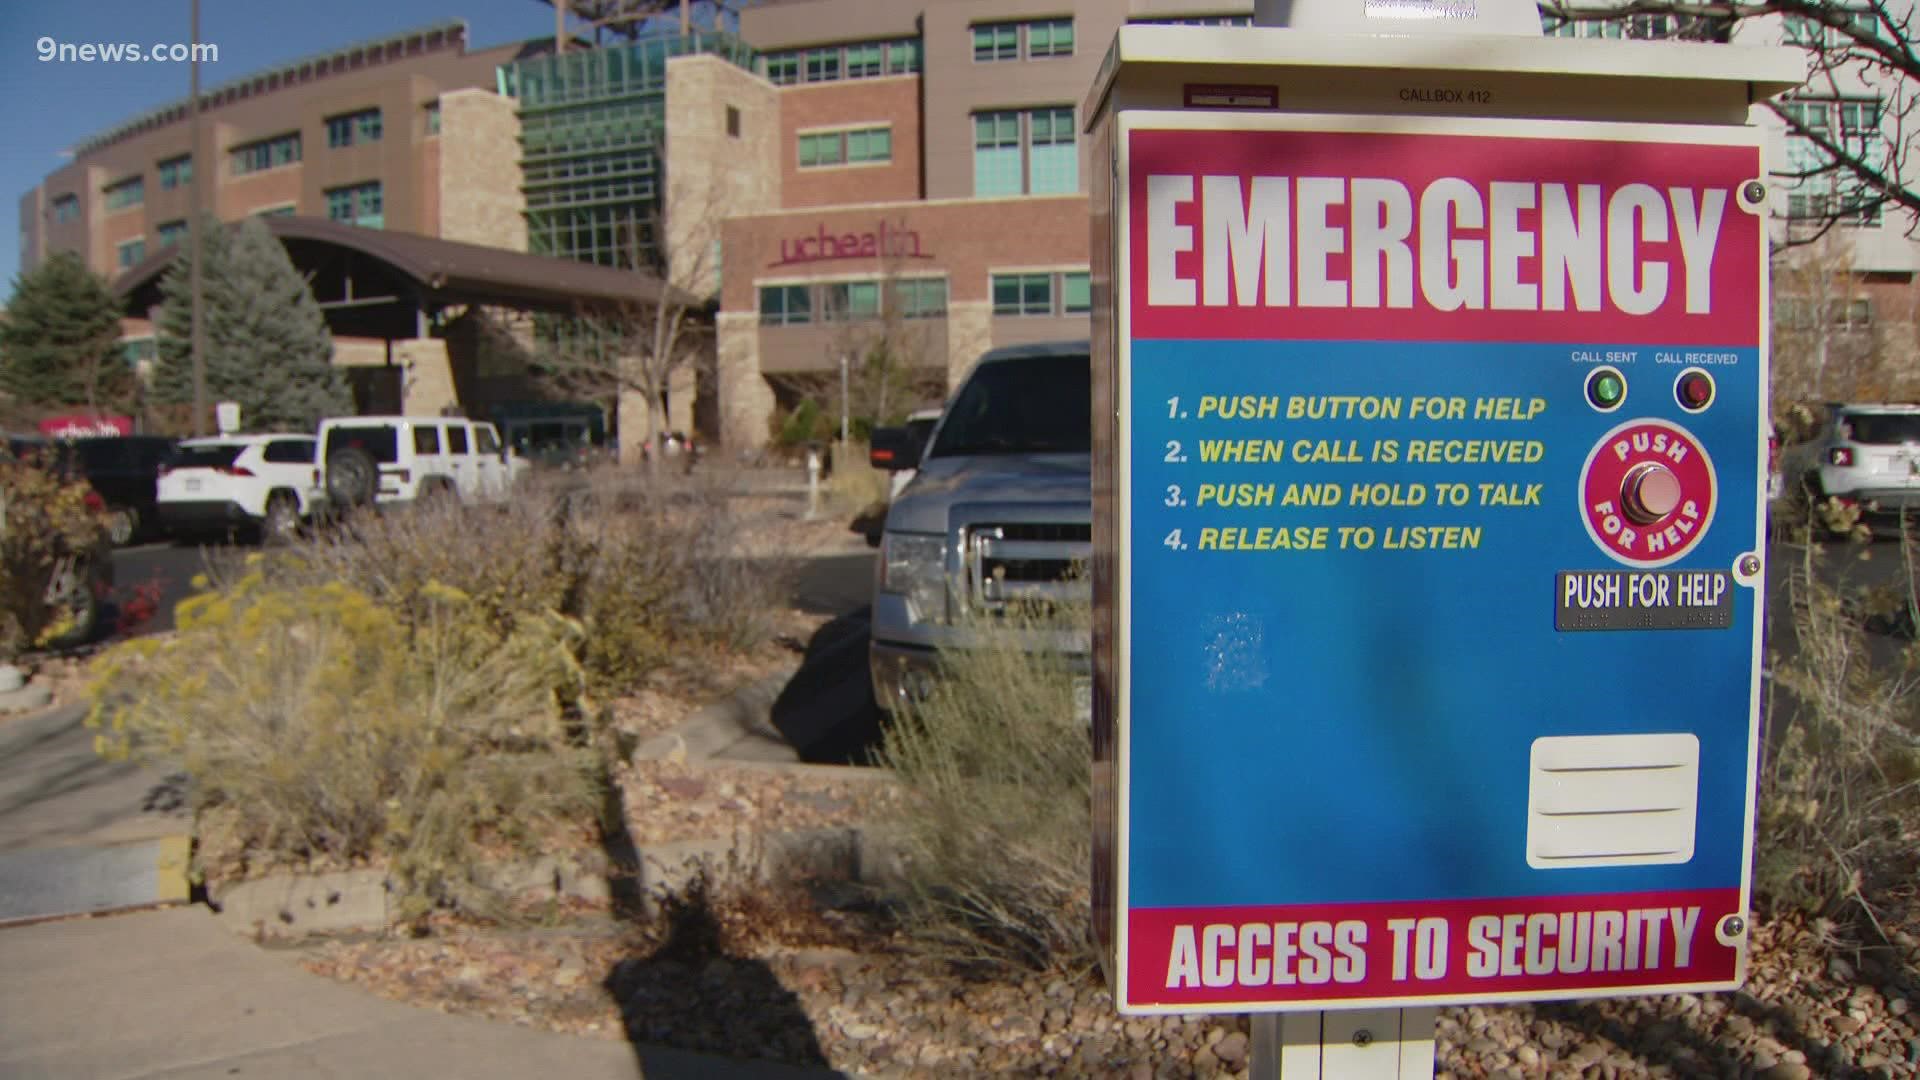 A healthcare team from FEMA is in Colorado to assist with staffing at a hospital in Pueblo, though the state has a list of volunteers on call to help.